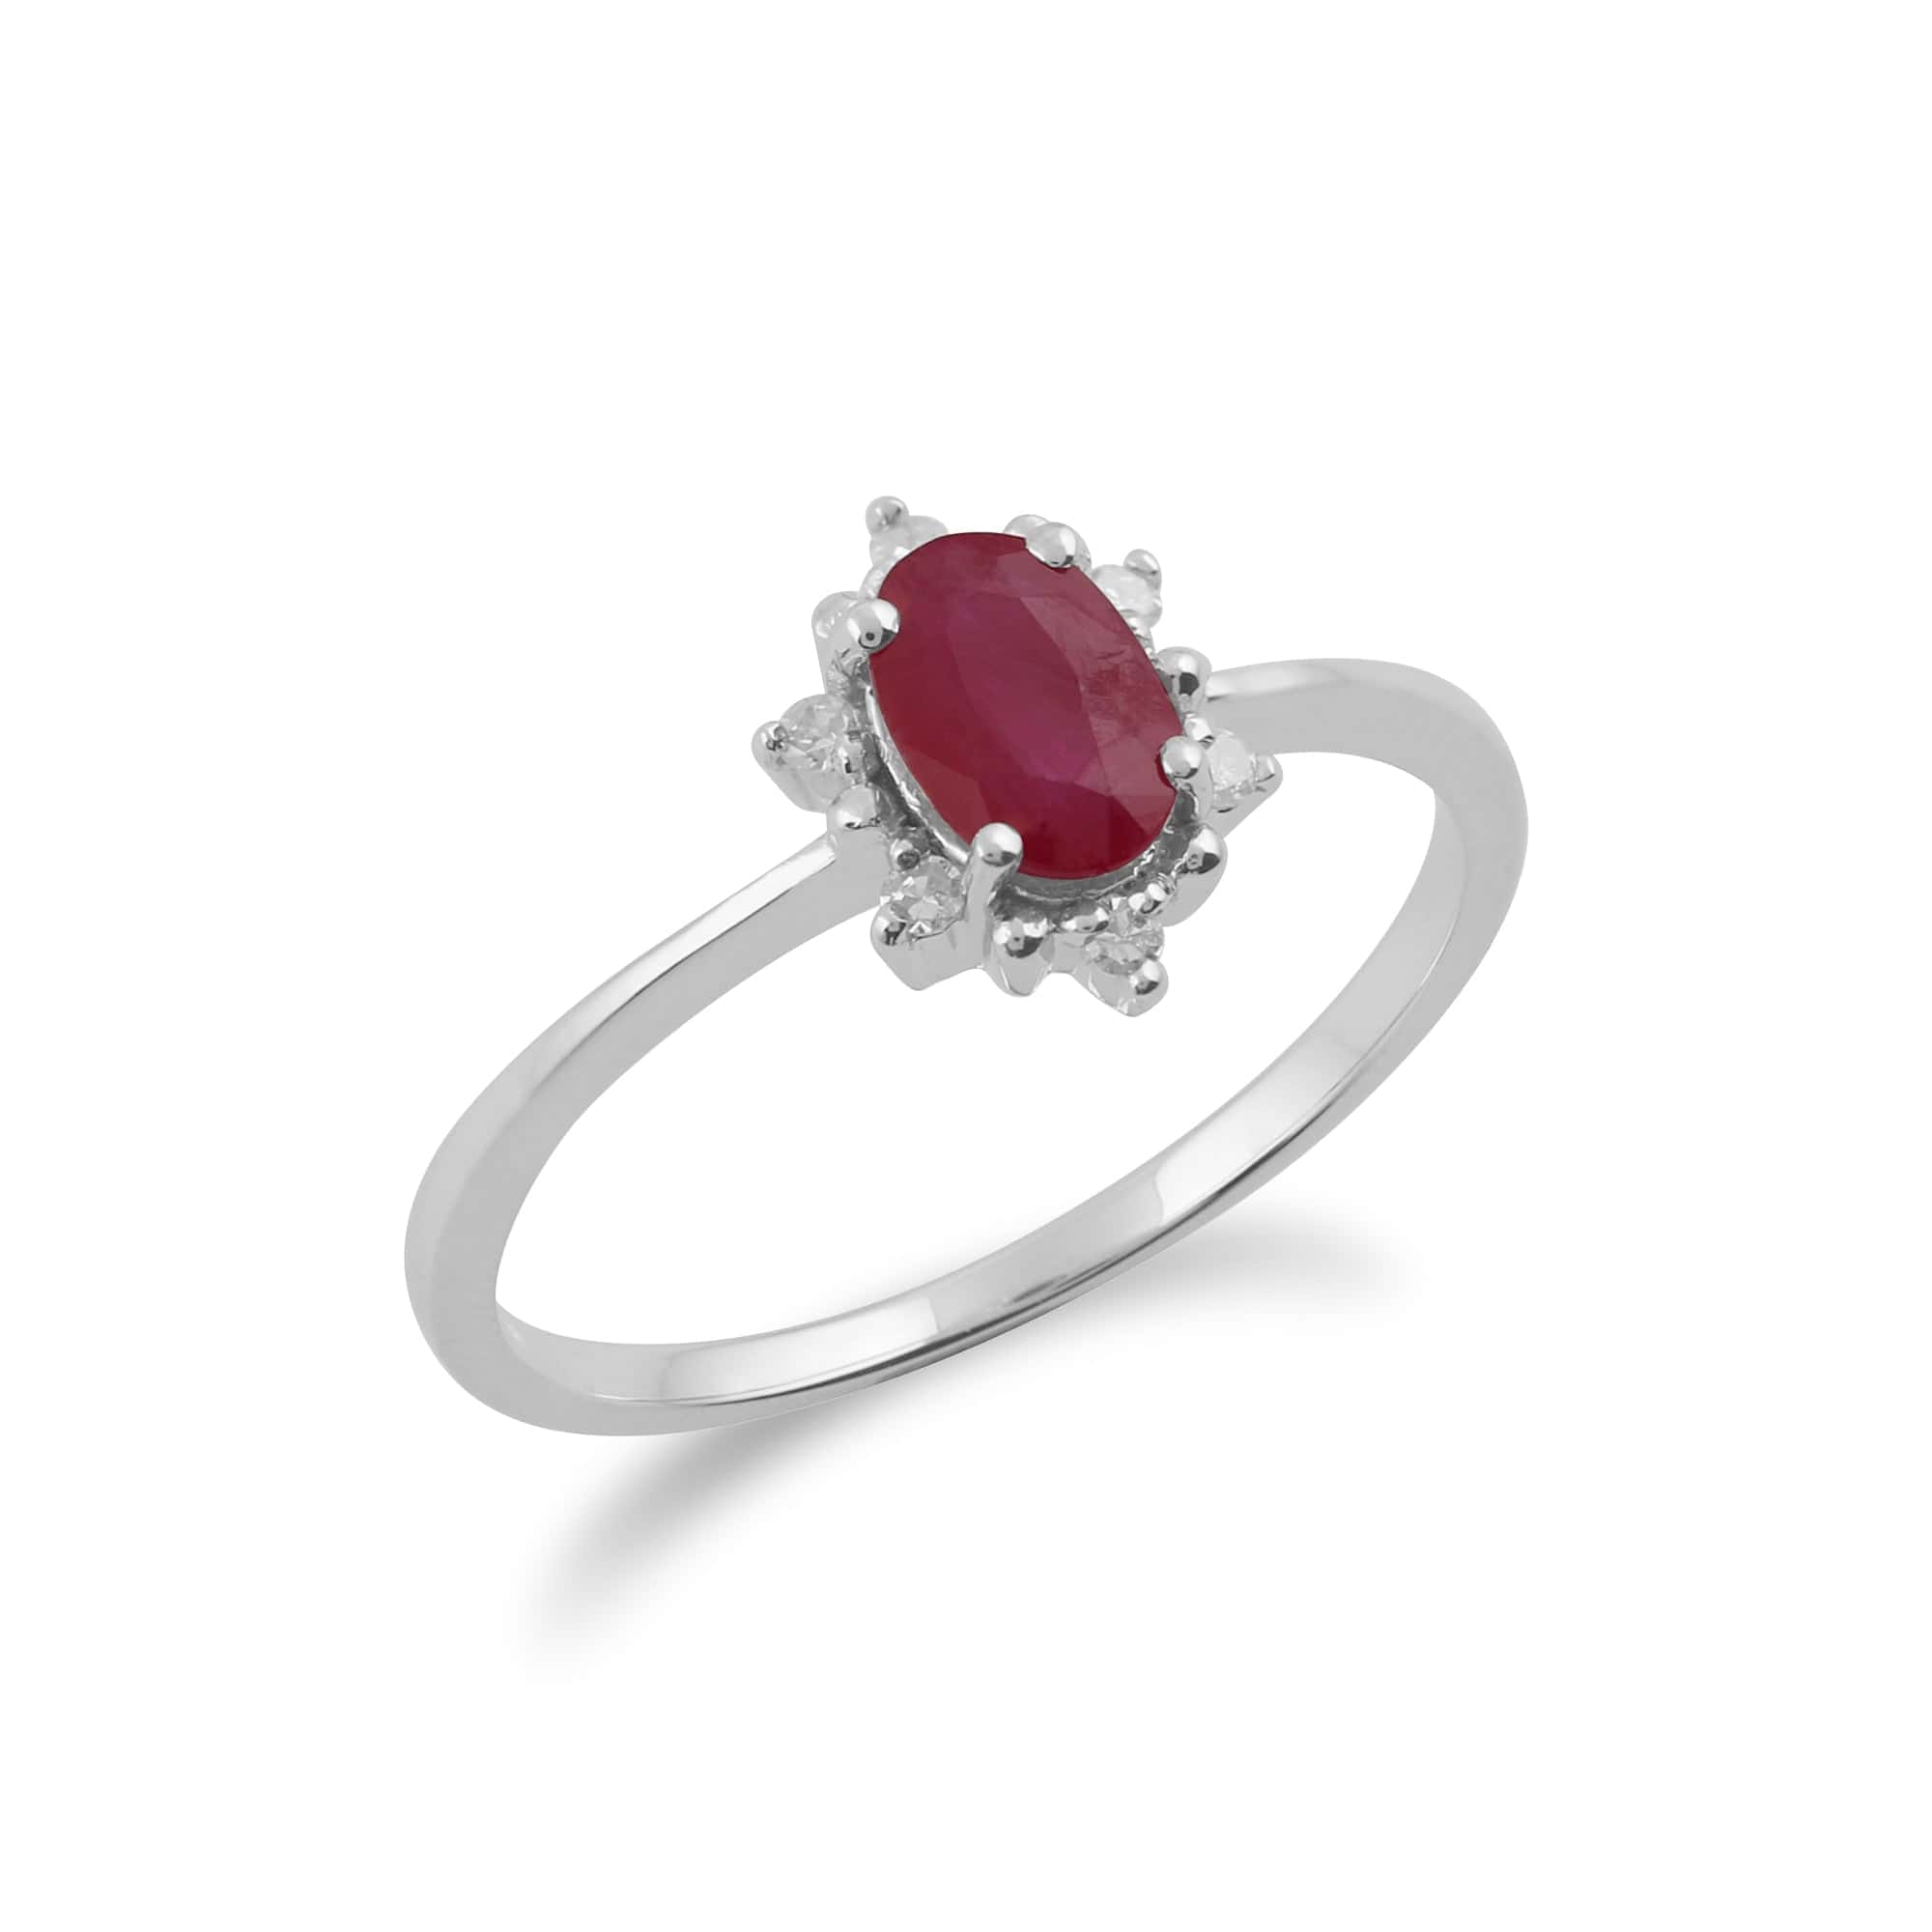 Gemondo 9ct White Gold 0.63ct Ruby & Diamond Oval Cluster Ring Image 2